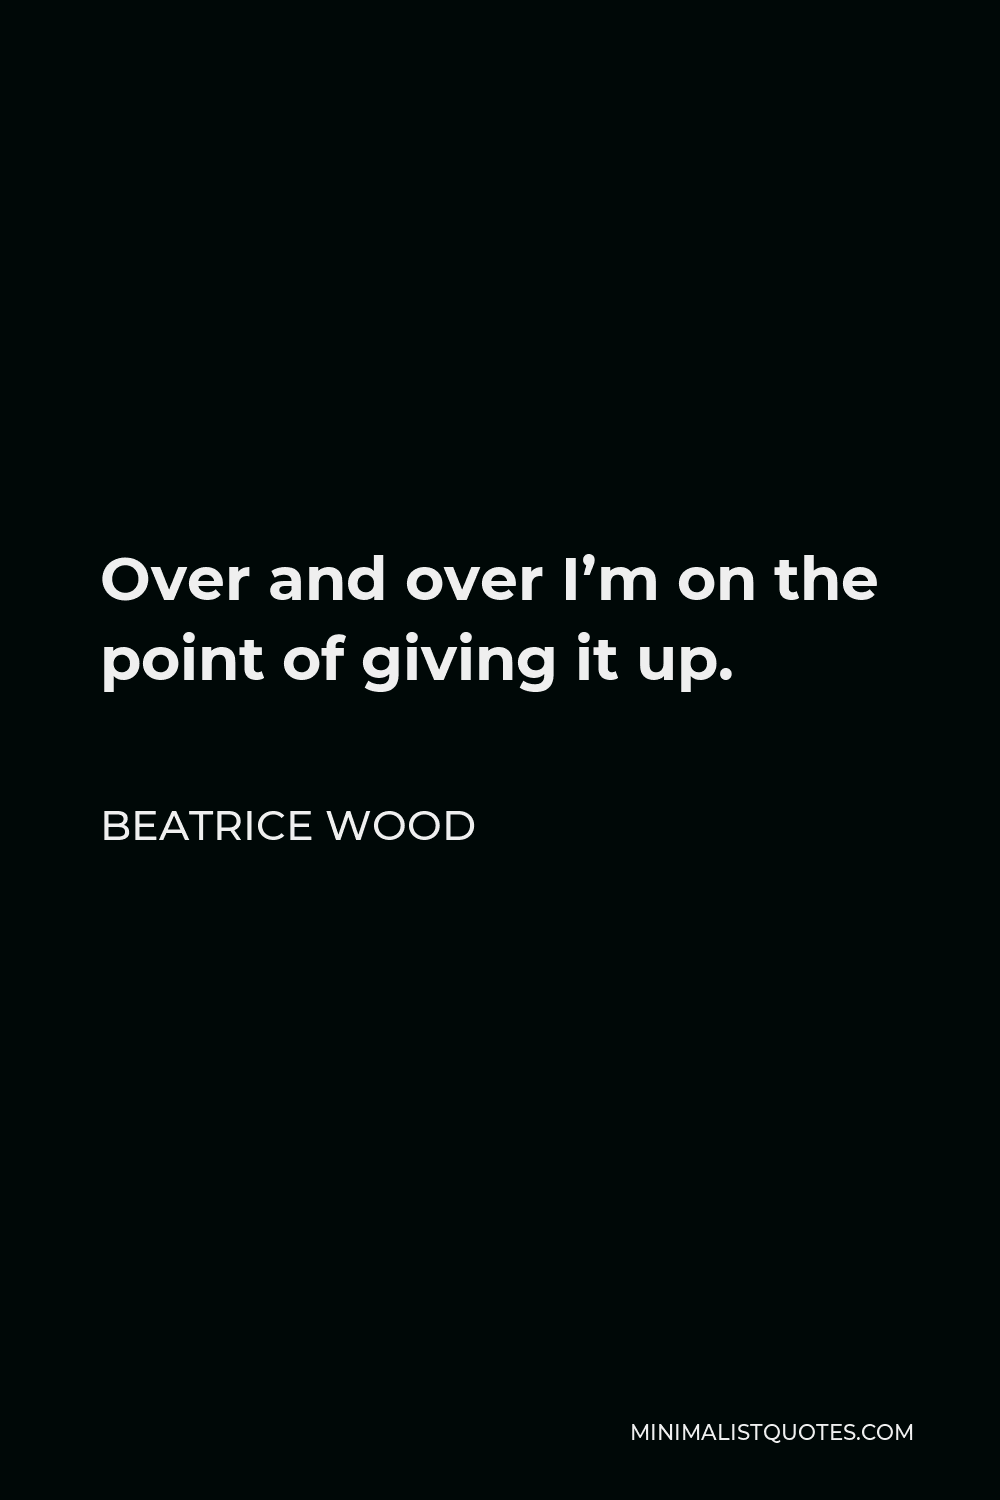 Beatrice Wood Quote - Over and over I’m on the point of giving it up.